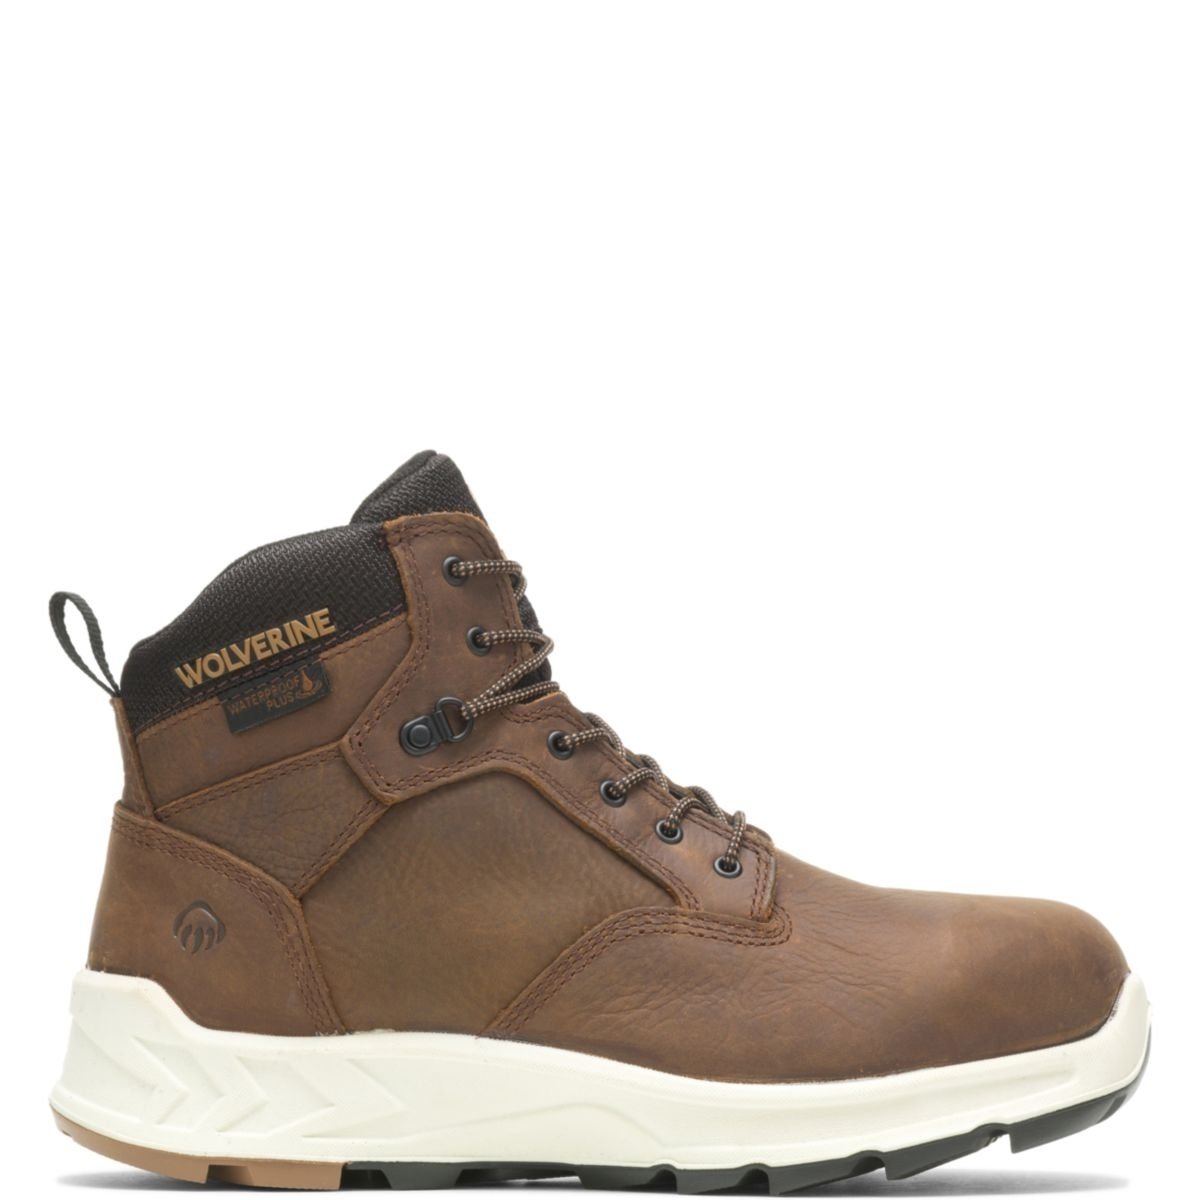 WOLVERINE Men's ShiftPlus Work LX 6 Alloy Toe Work Boot Brown - W201156 BROWN - BROWN, 8-M